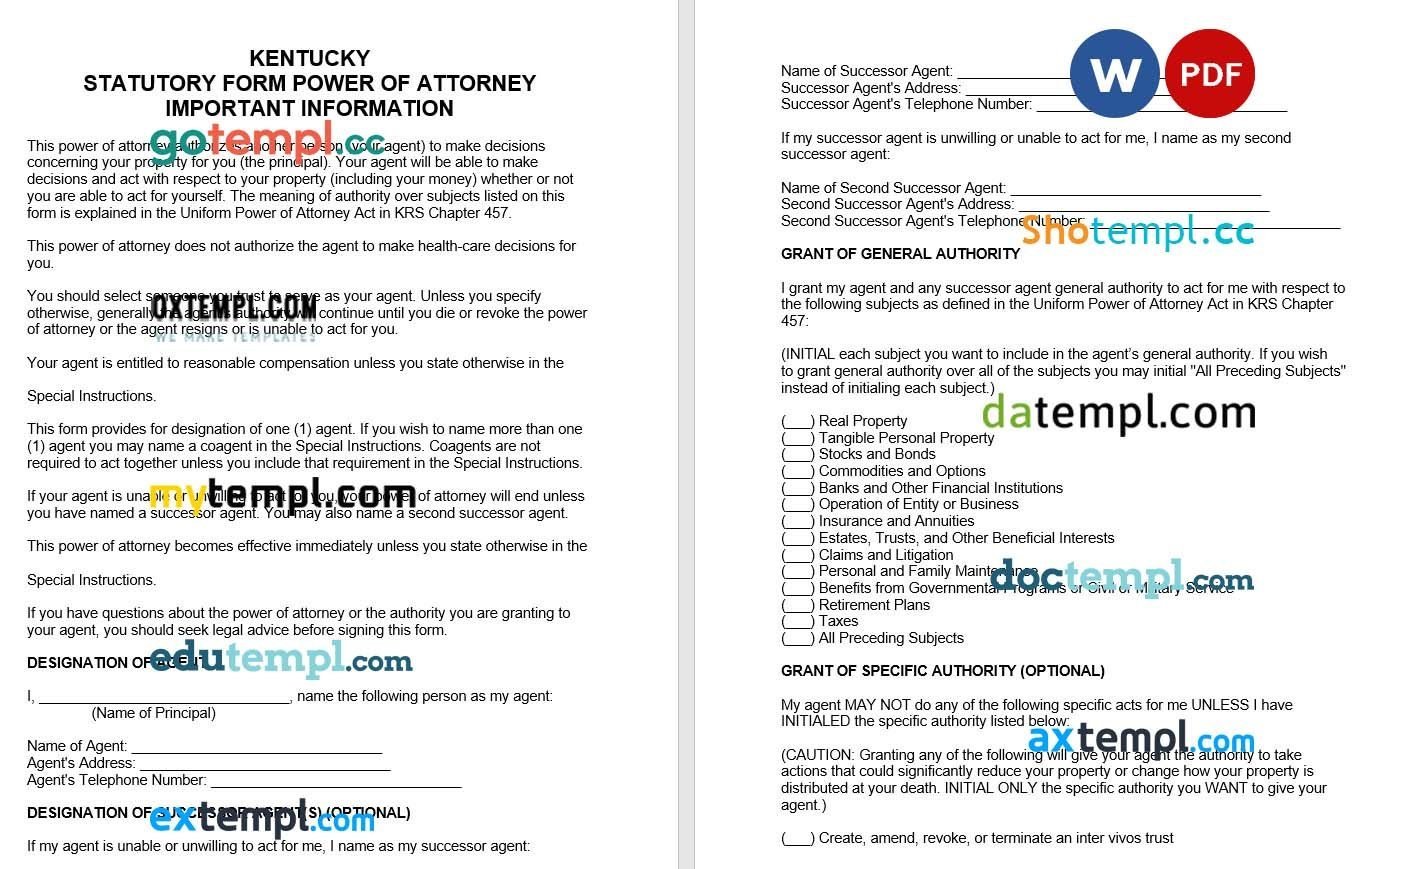 Kentucky Statutory Durable Power of Attorney Form example, fully editable